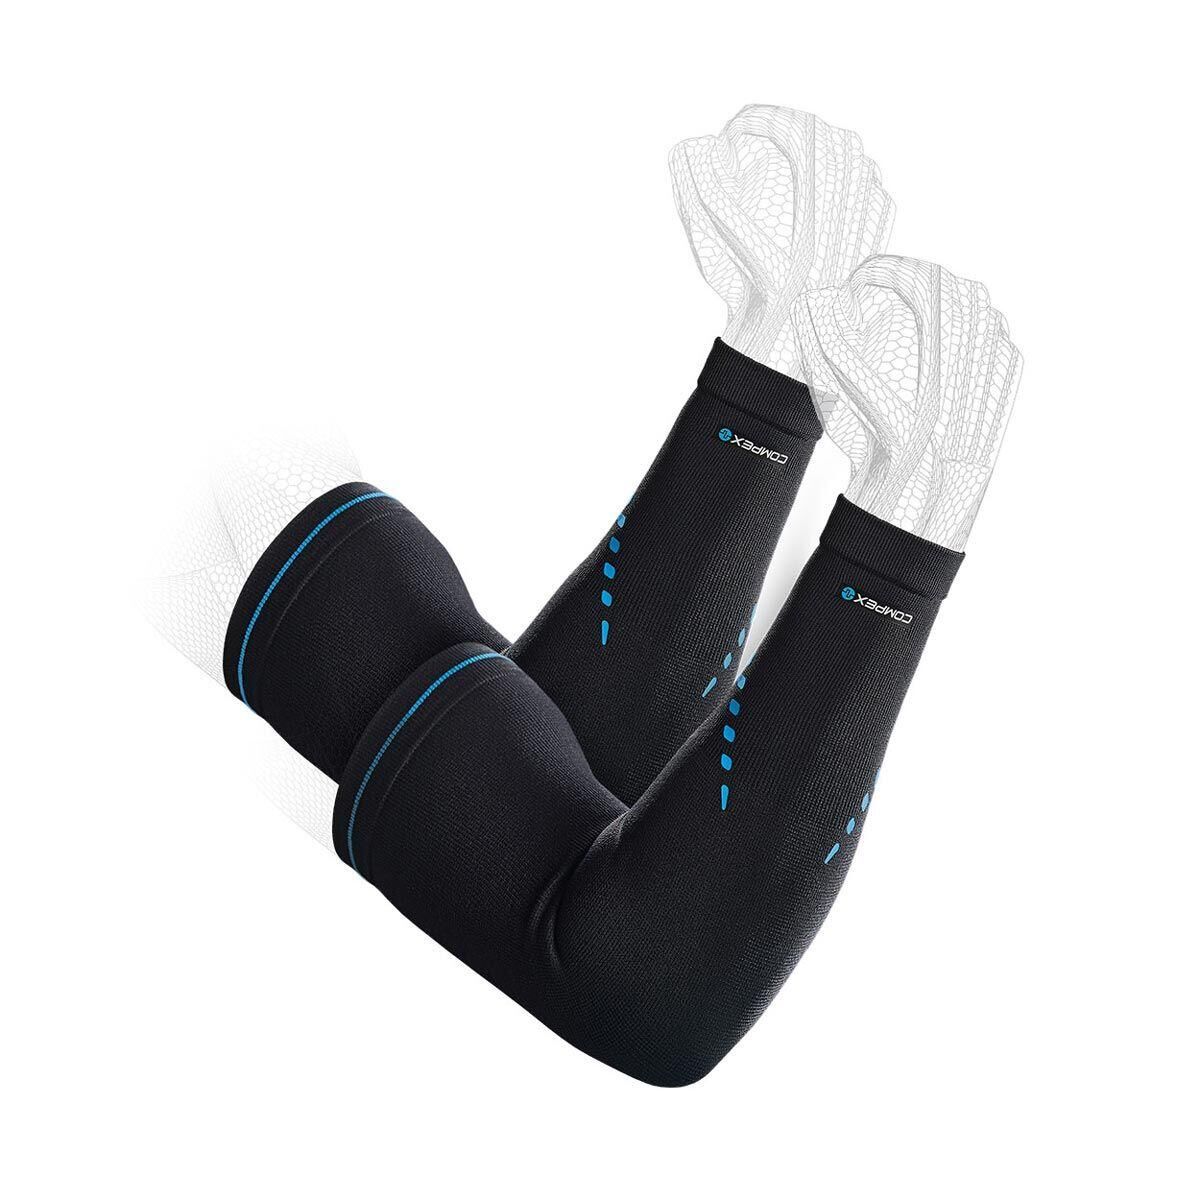 COMPEX COMPEX ACTIV' ARM SLEEVES - compression sleeves